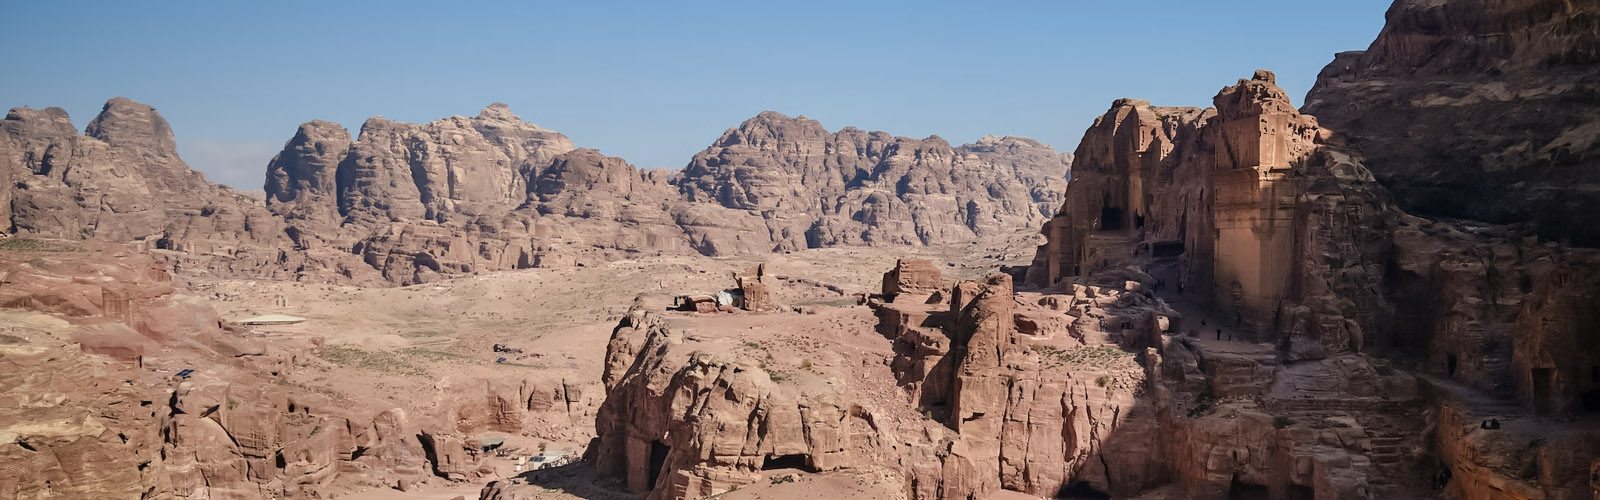 Jordan Petra Things to Do in Petra,Bab As-Siq,Best Time to Visit Petra,How to Get to Petra